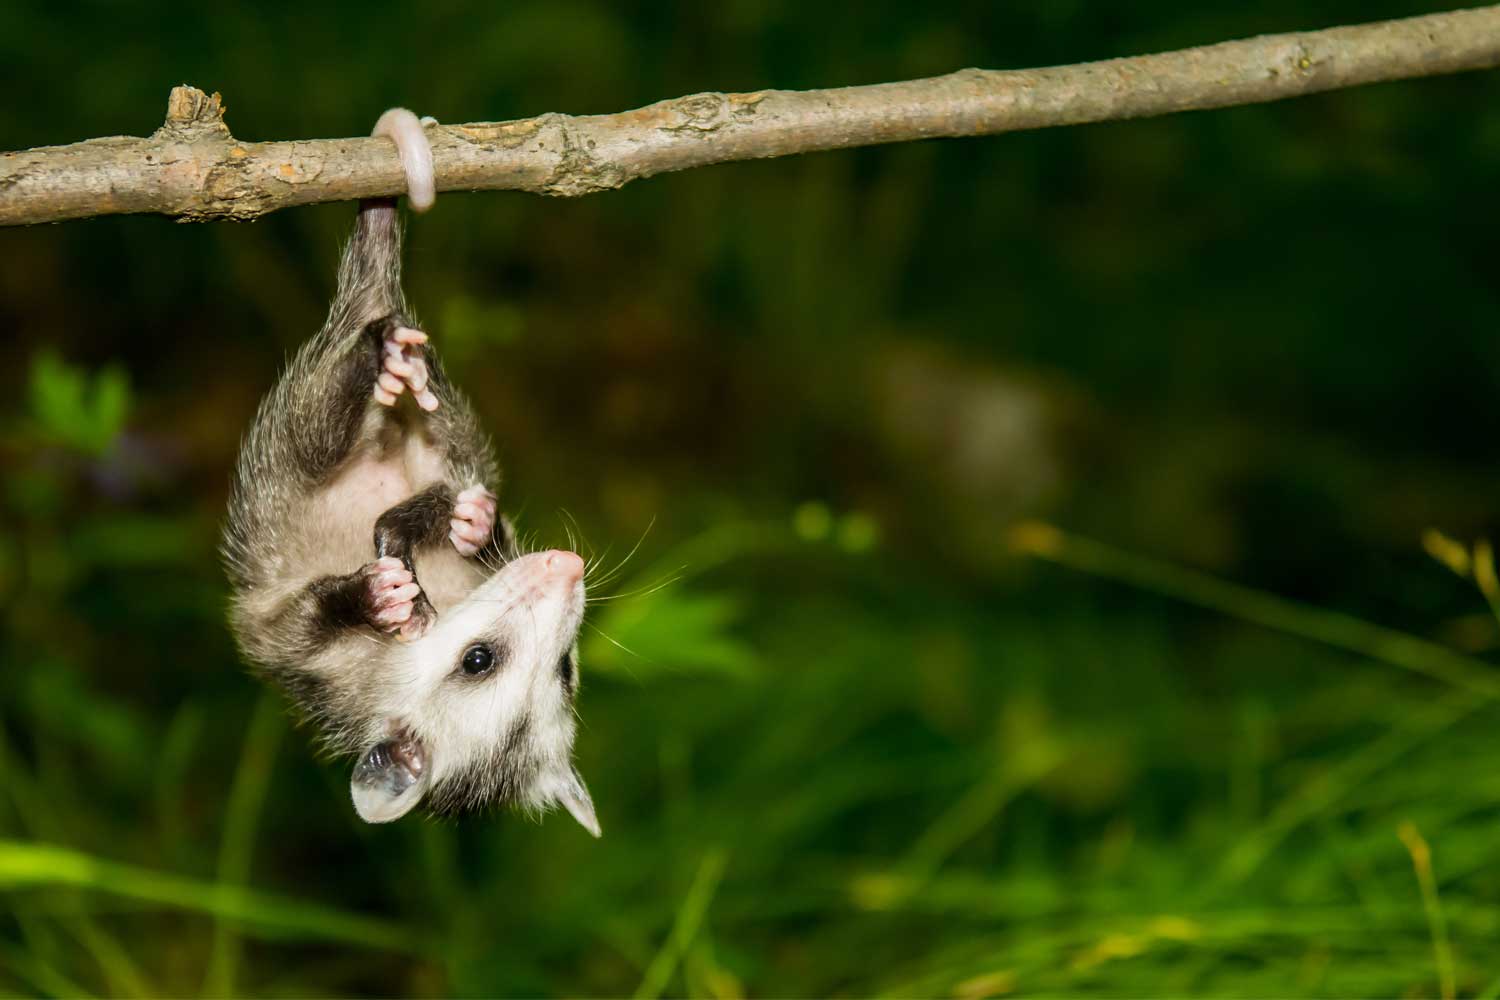 Opossum hanging by tail from a branch.